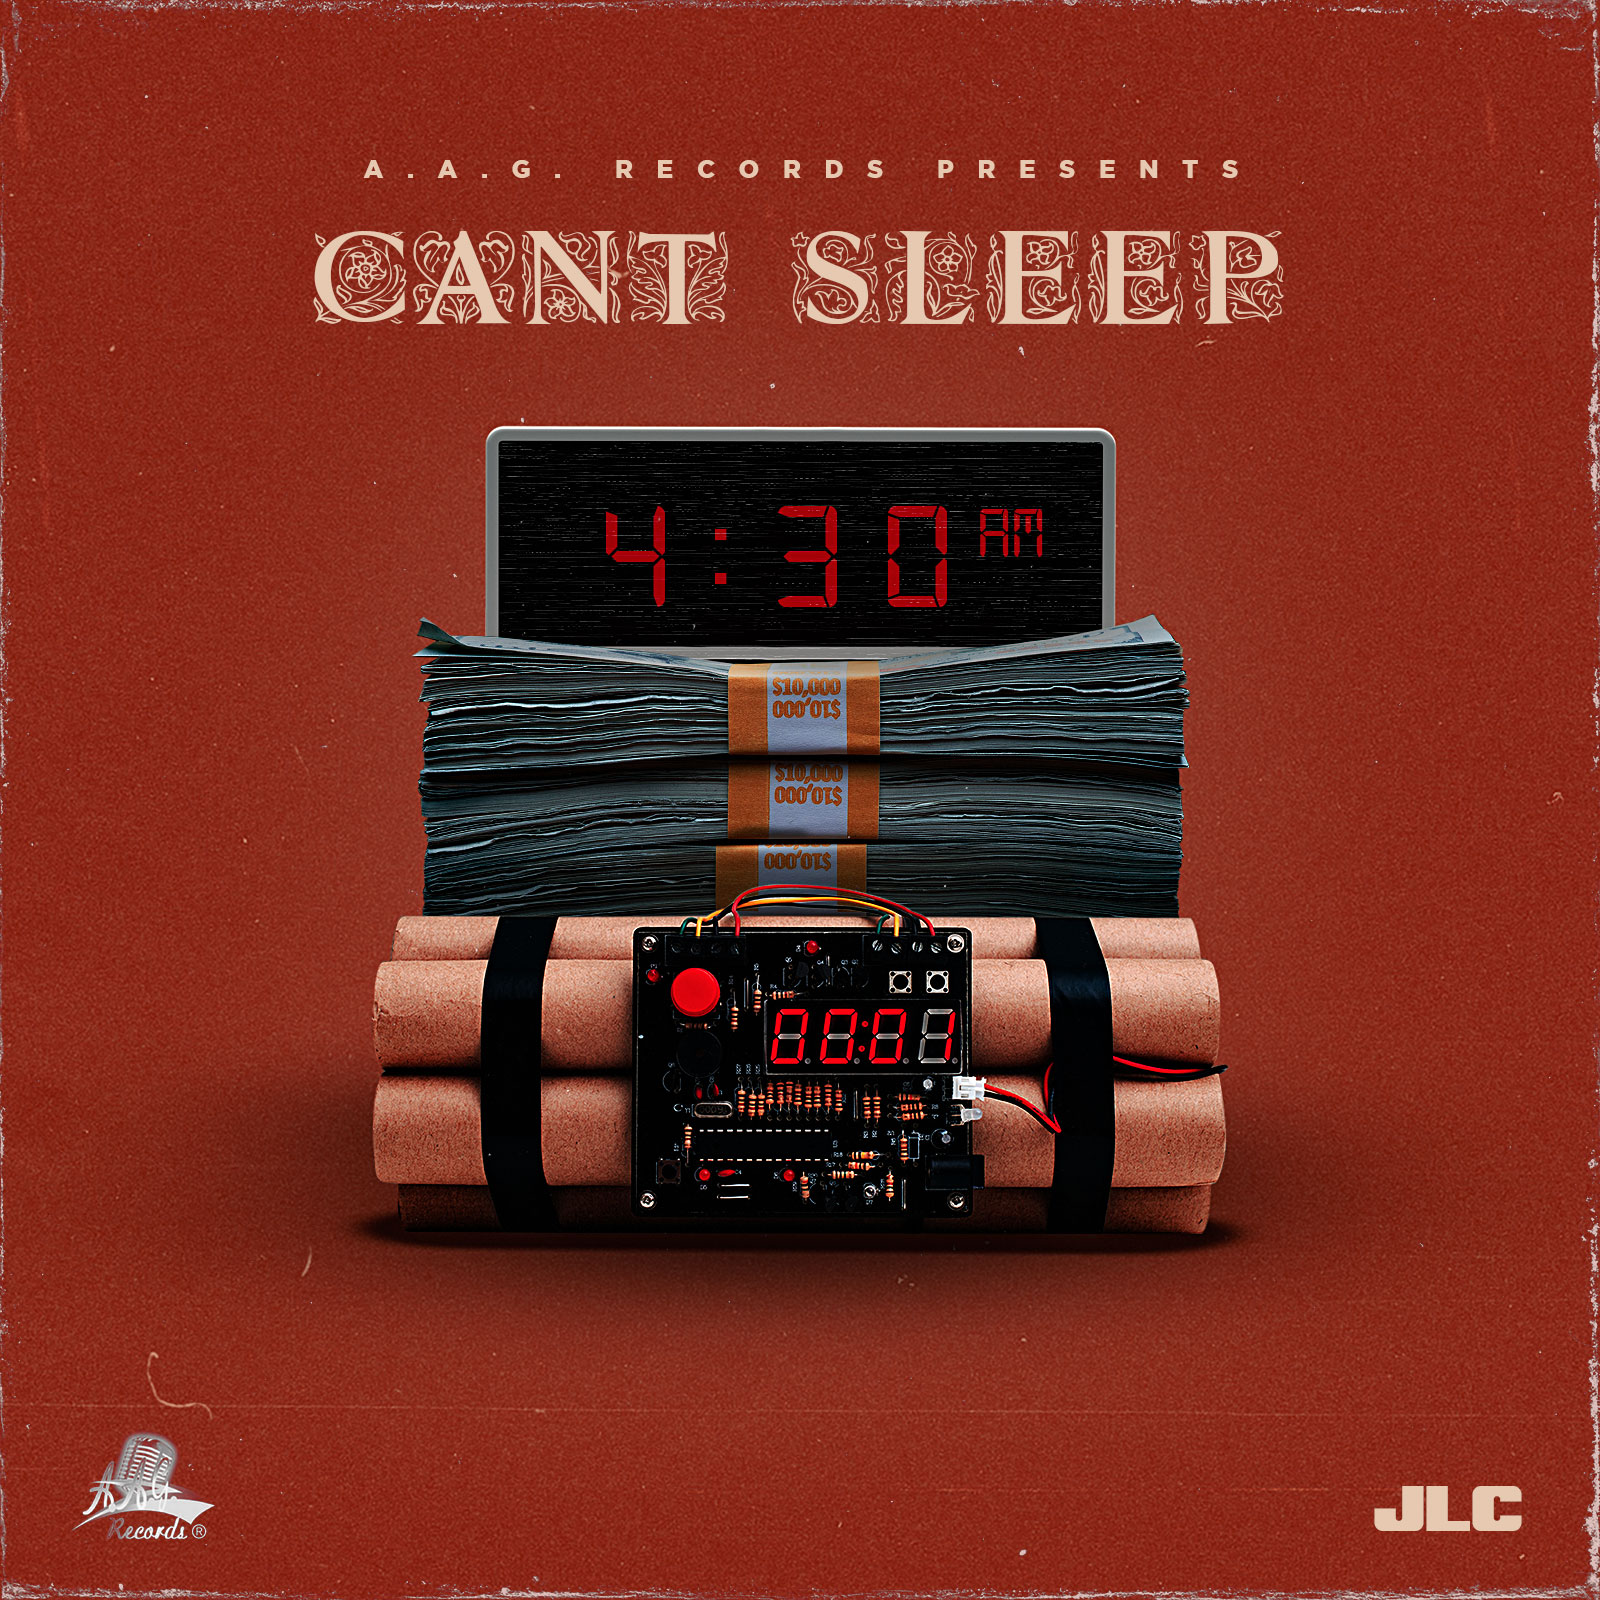 Art for Cant Sleep by JLC